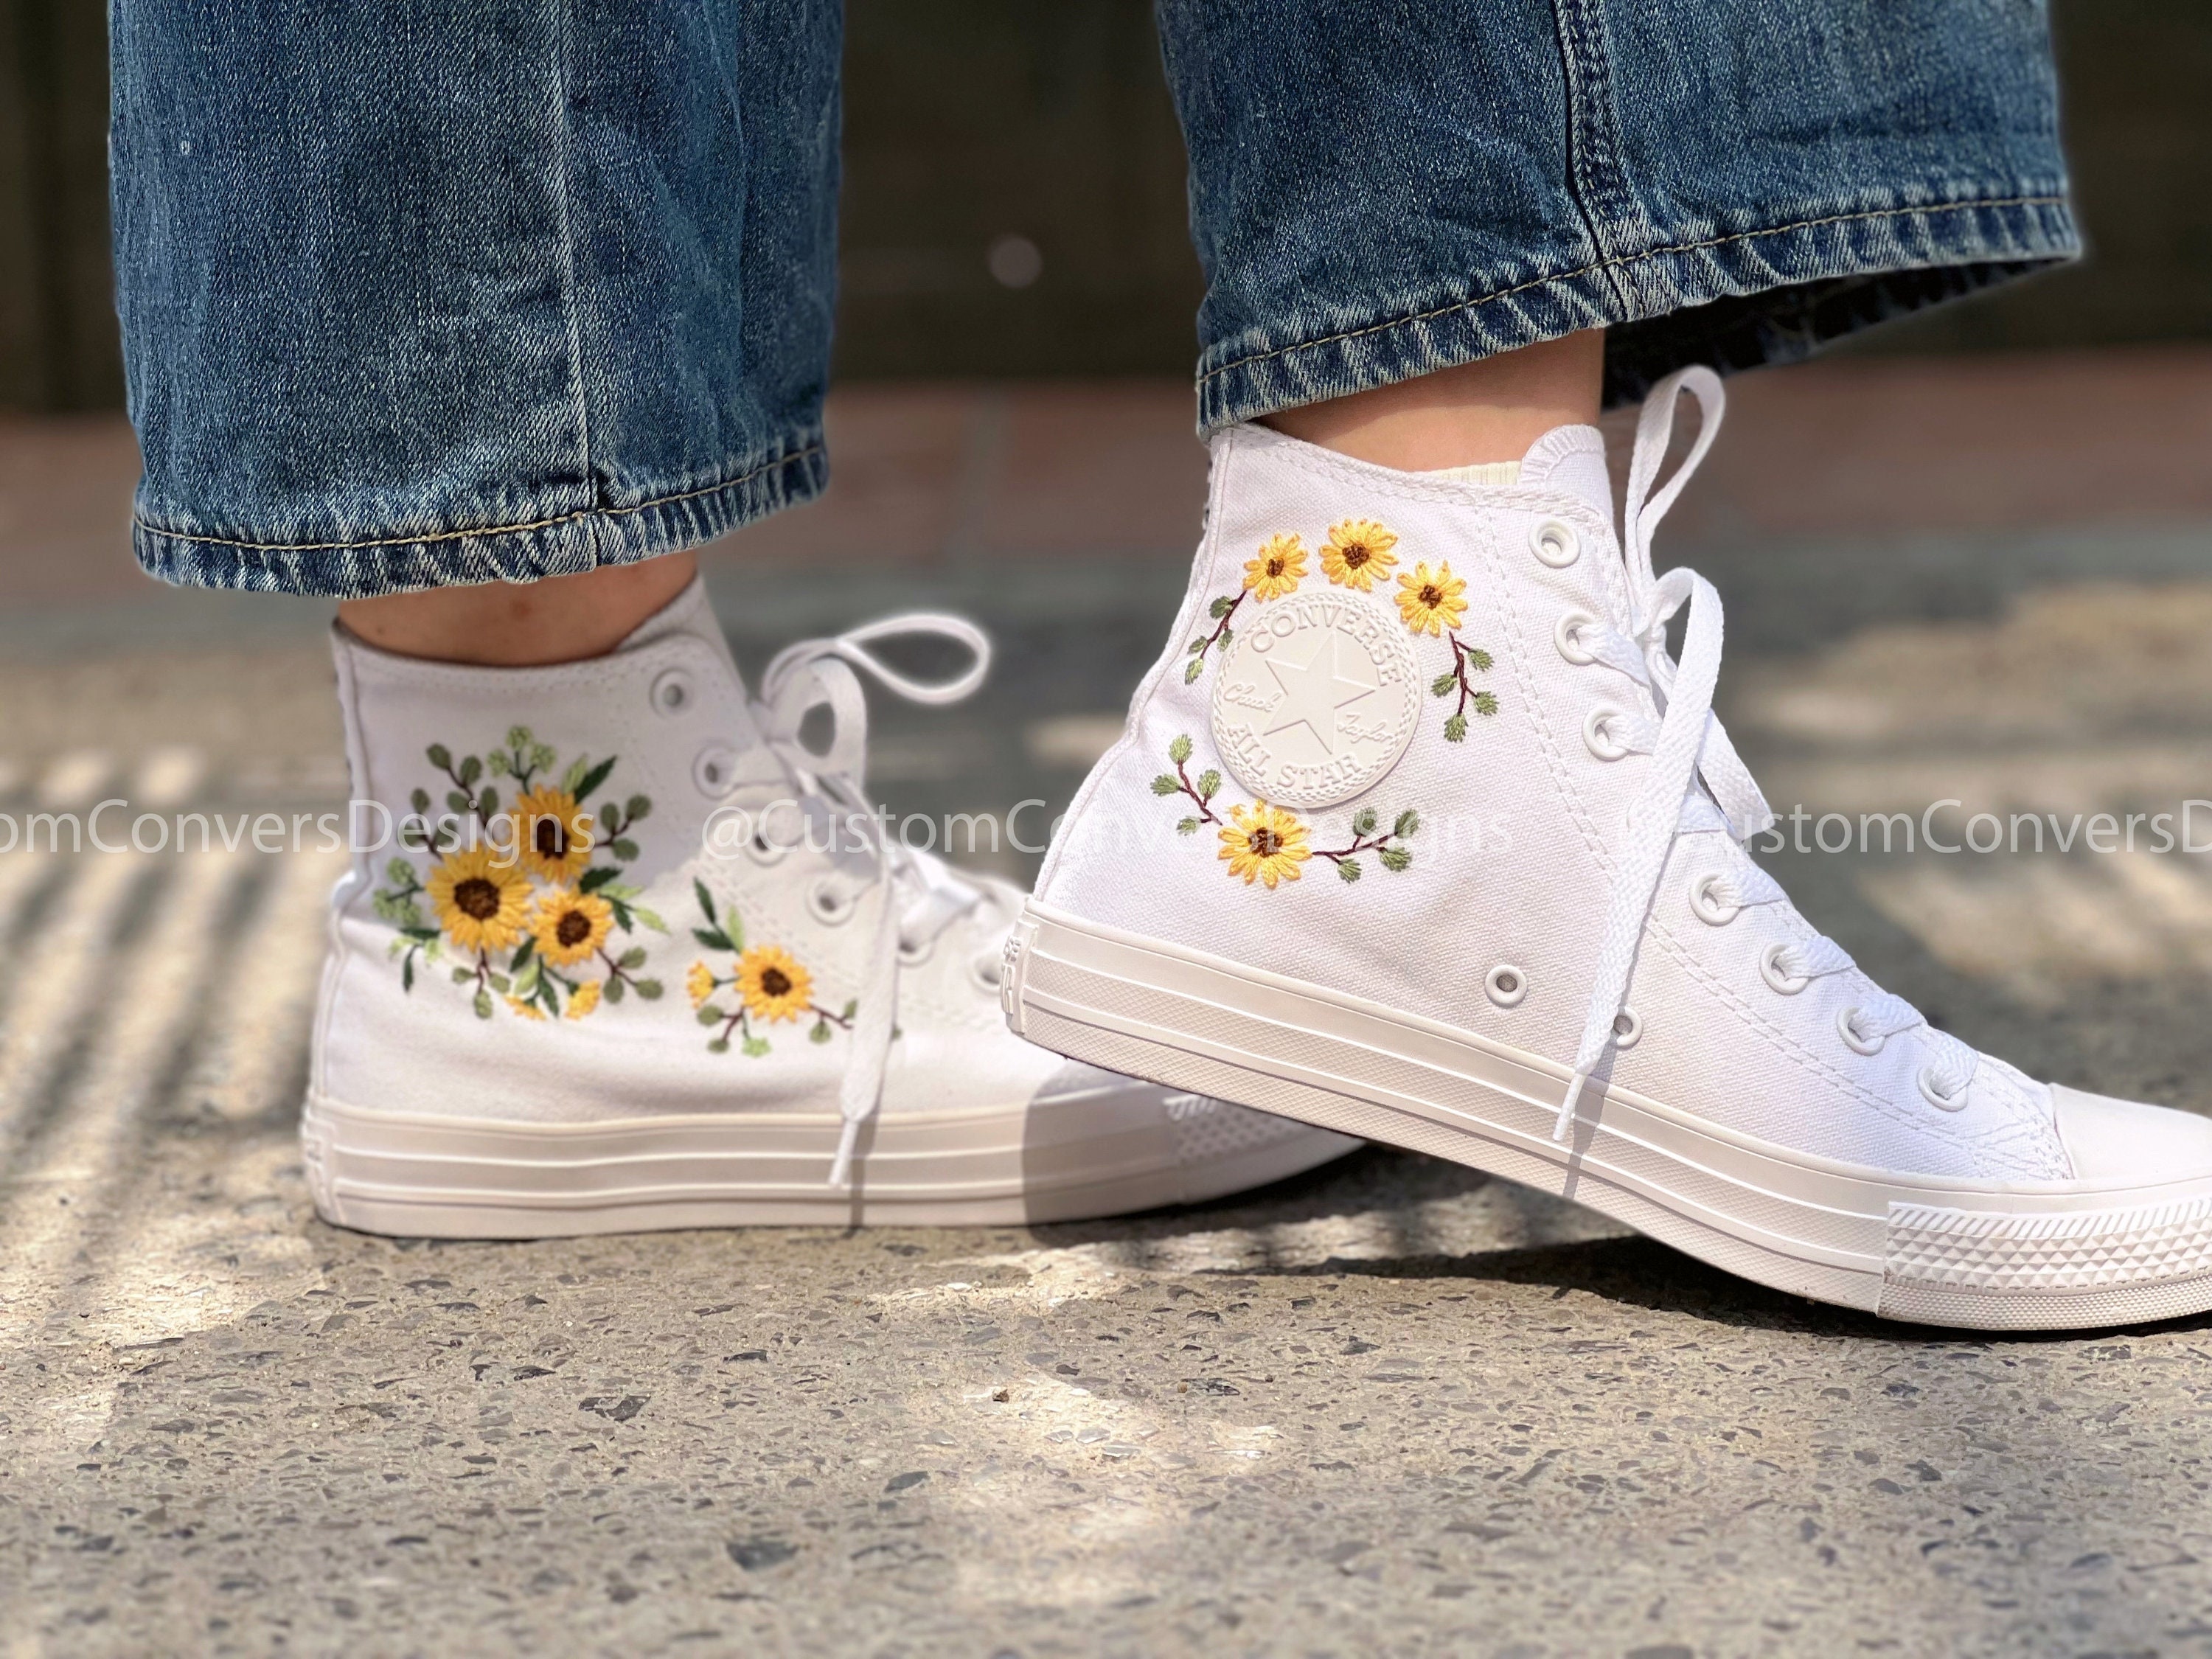 Embroidered Converse/Embroidered Sneakers Full White/Flower